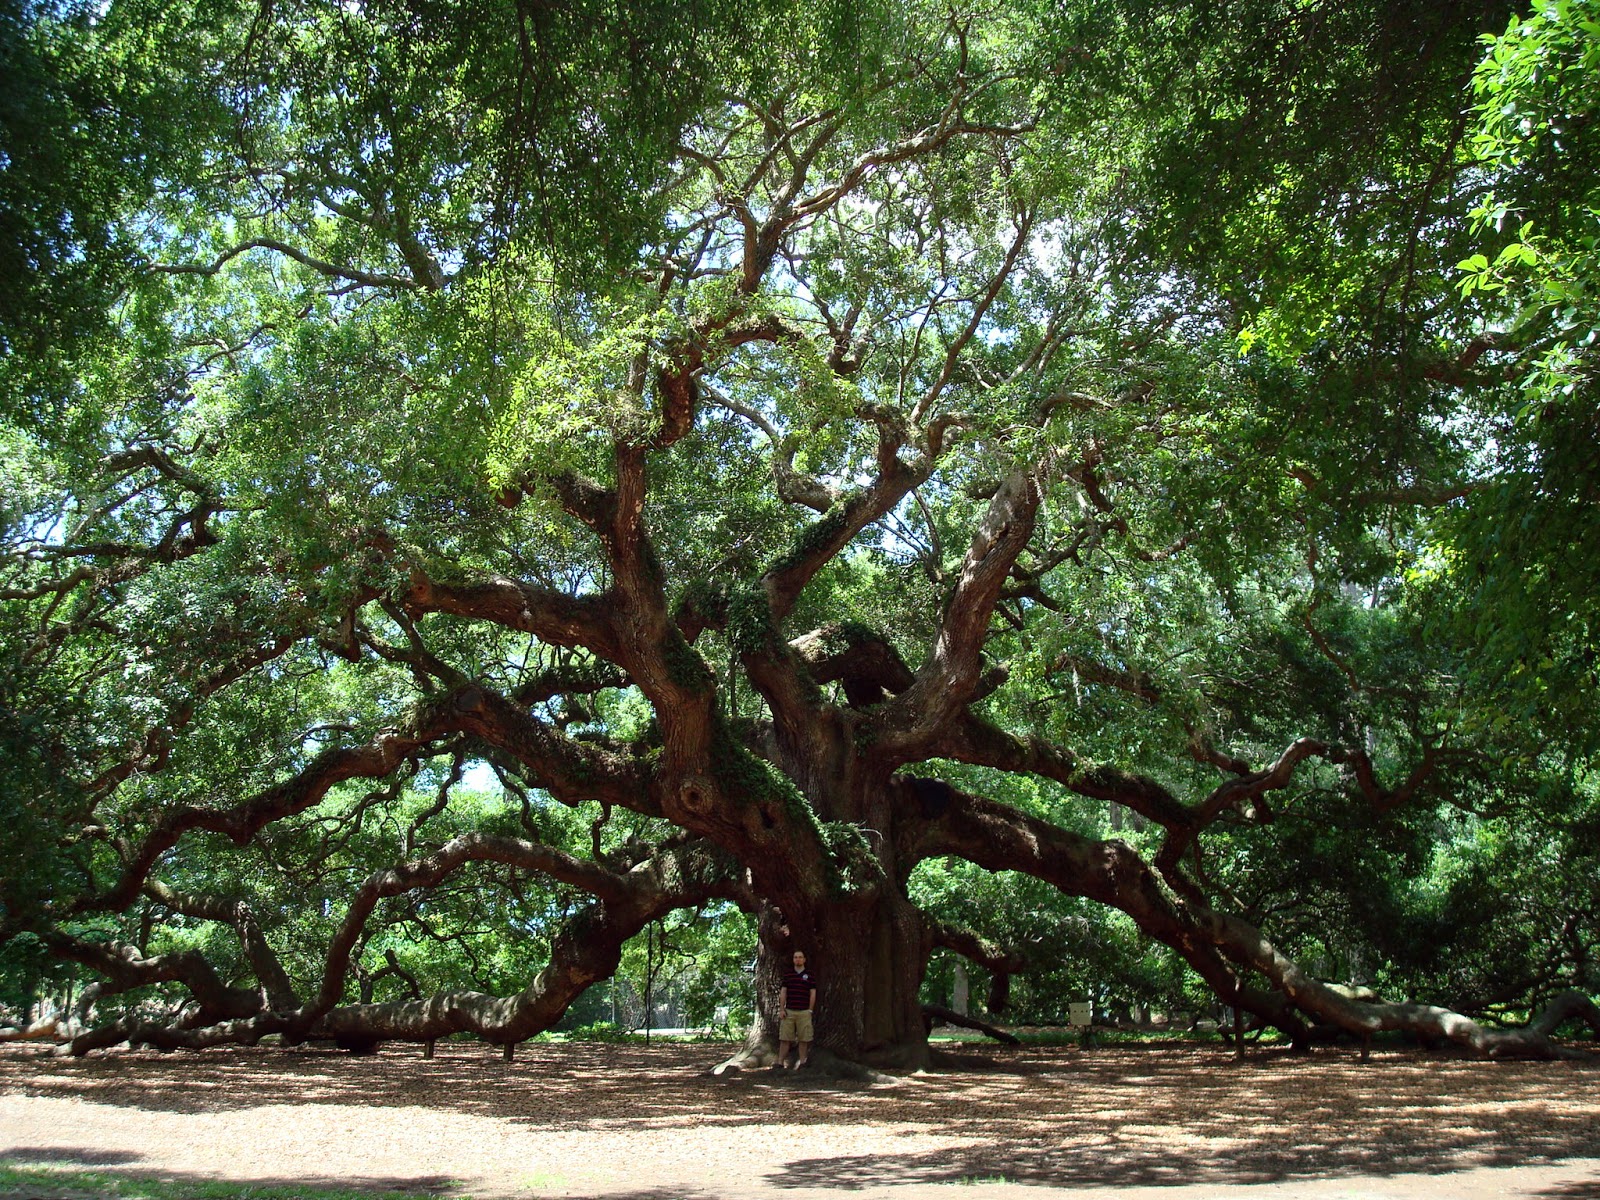 What are some sawtooth oak tree facts?